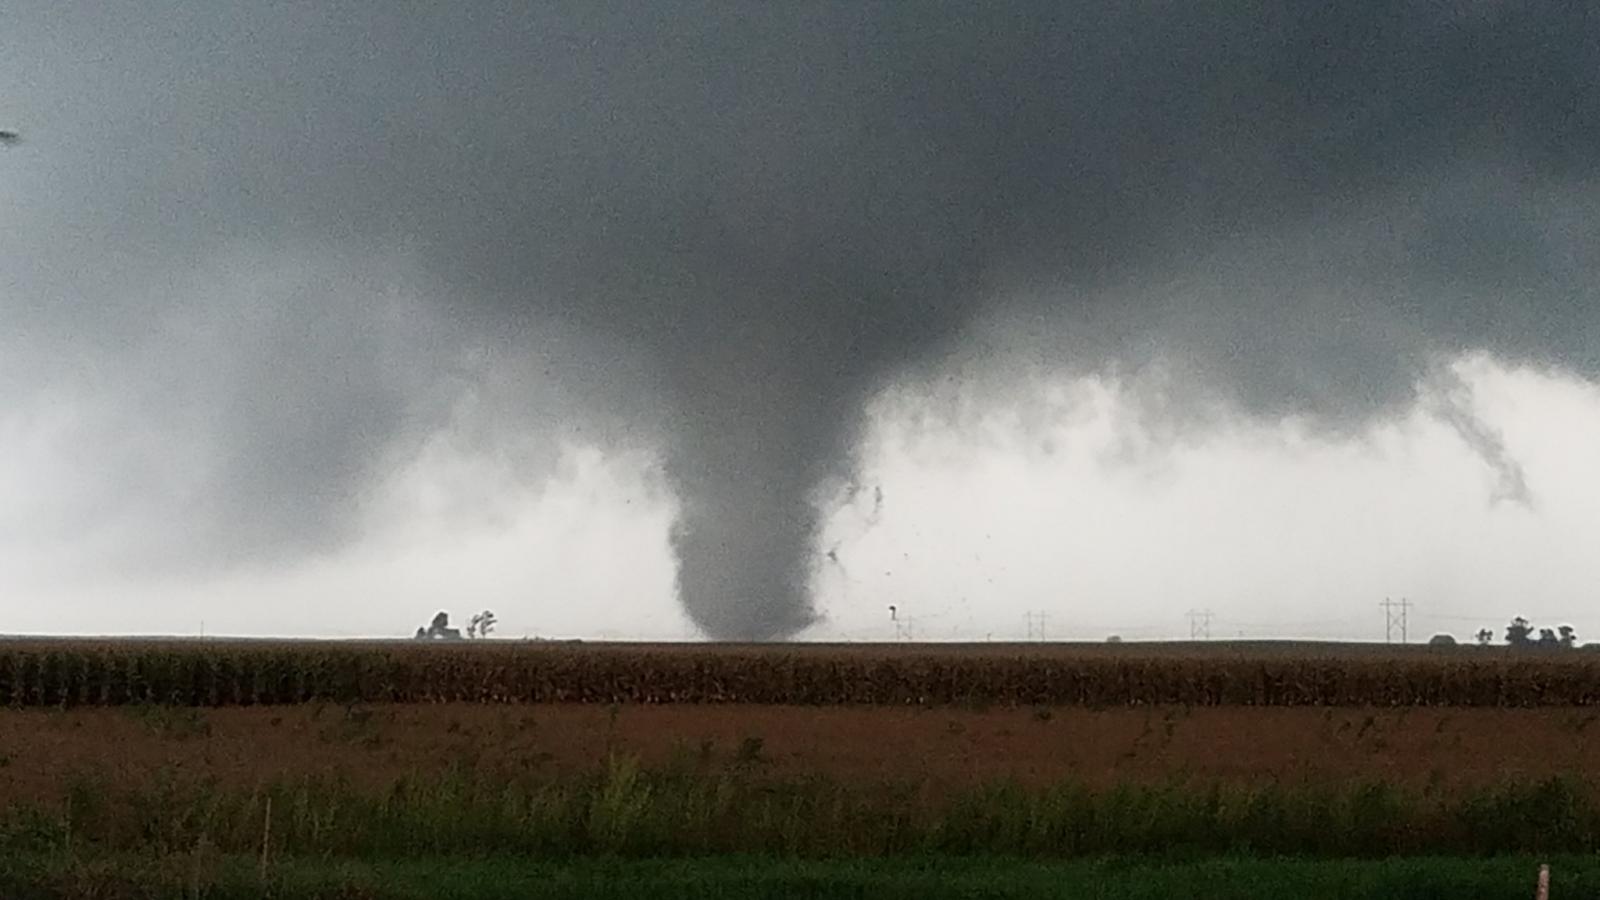 Tornado south of Homer at 6:41 pm. Image courtesy of Jeff Frame.